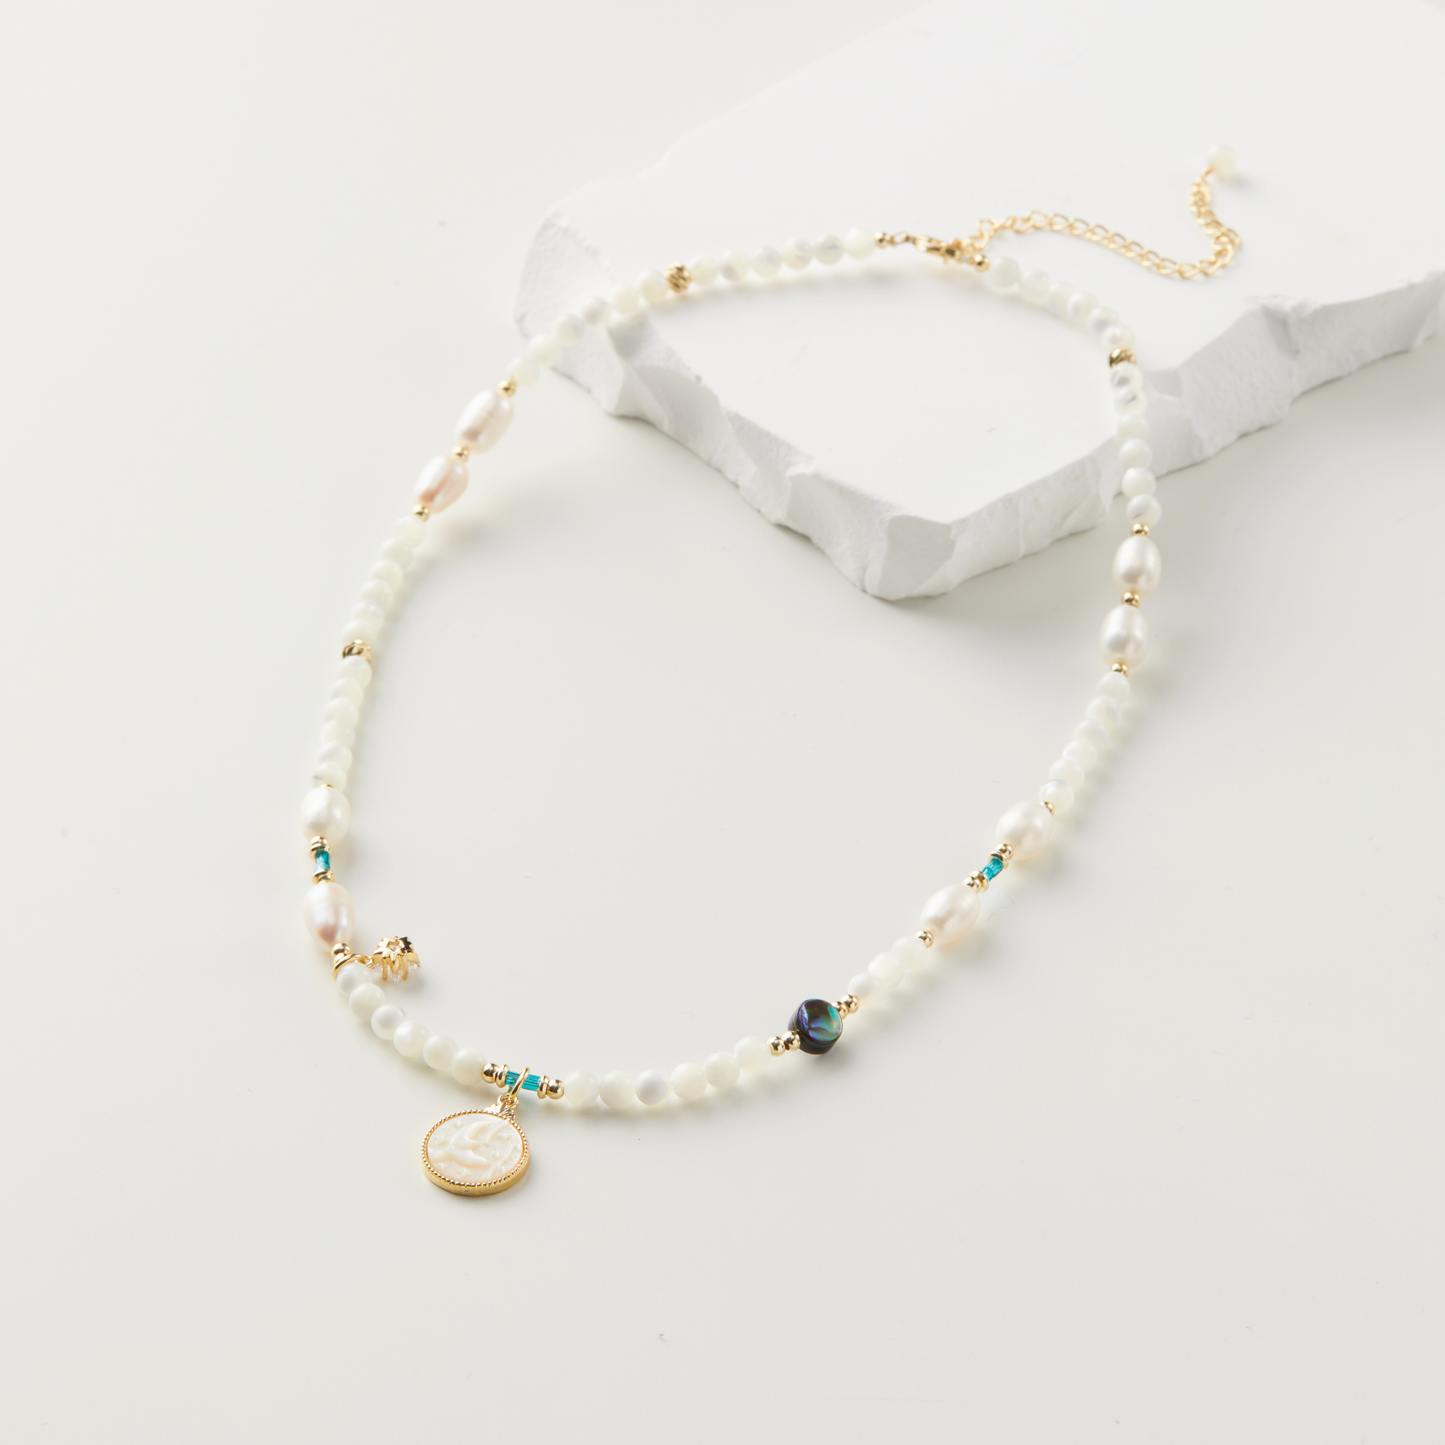 Artisan Necklace with Mermaid Conch Shell, Freshwater Pearls, Star-Shaped Zircon, and Black Abalone